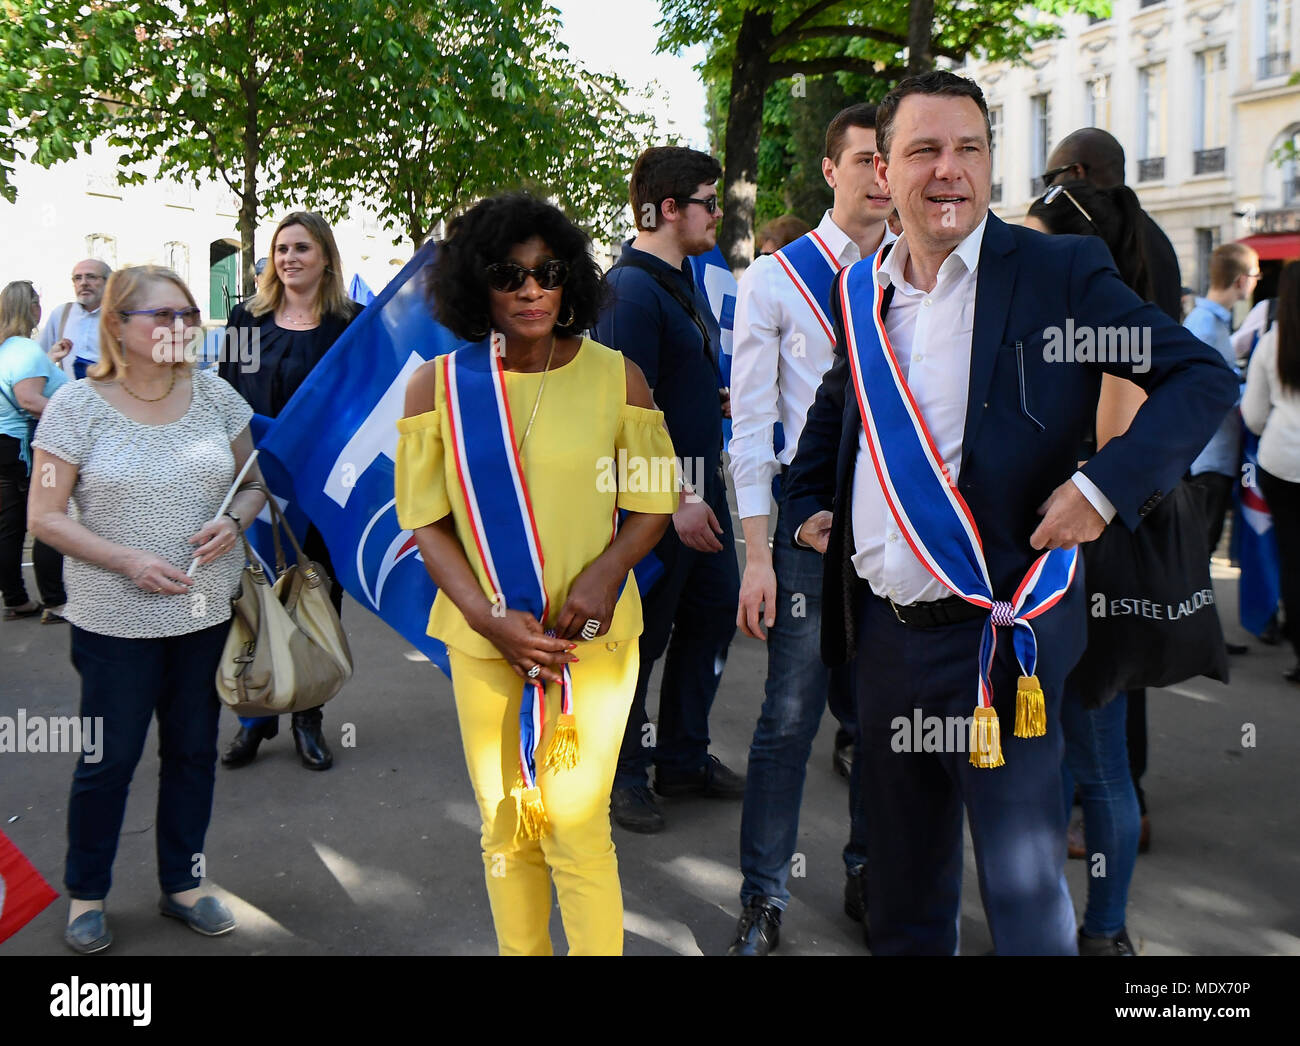 Paris, France, 20th April 2018. The national front to organize a rally against the immigration policy of President Emmanuel Macron, in front of the National Assembly, with a speech by Marine Le Pen Credit: Avenir Pictures/Alamy Live News Stock Photo